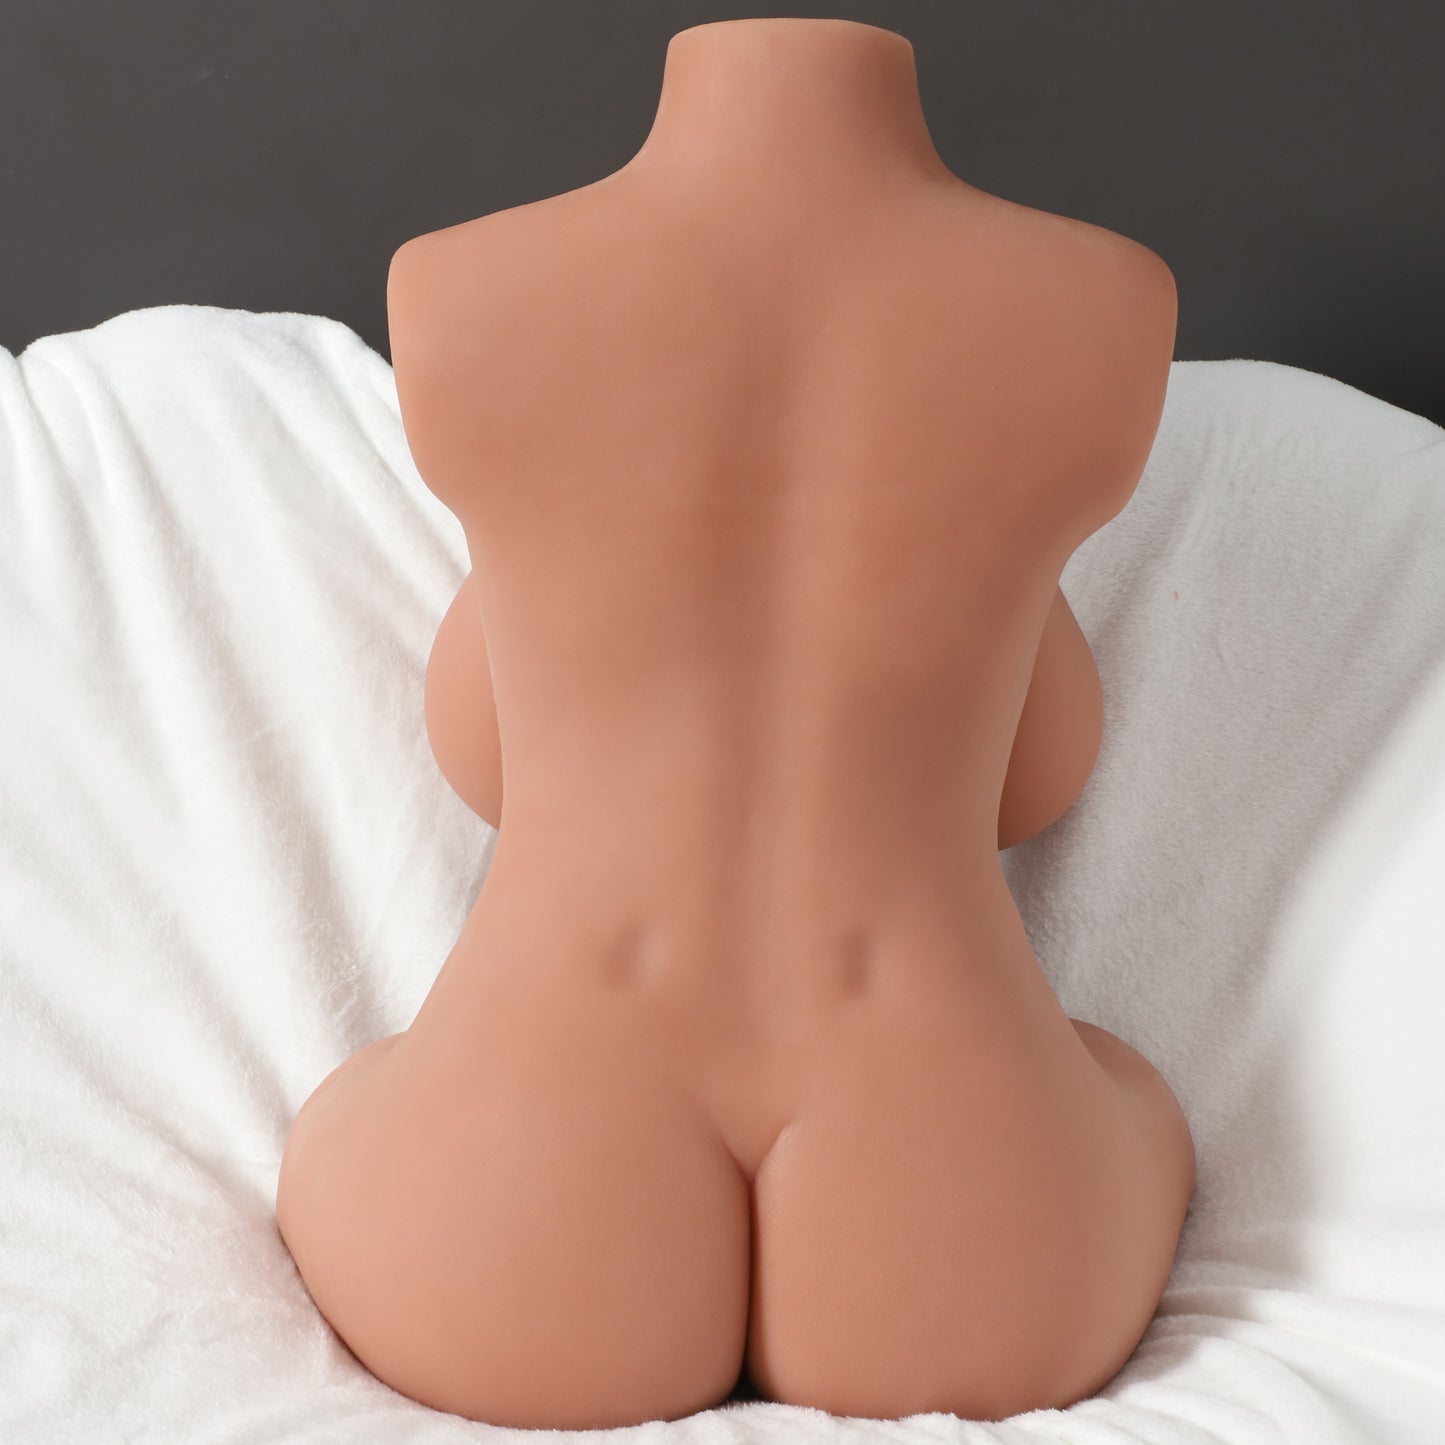 Brown Life Size Sex Doll for Men with Realistic Papaya Breasts 42LB